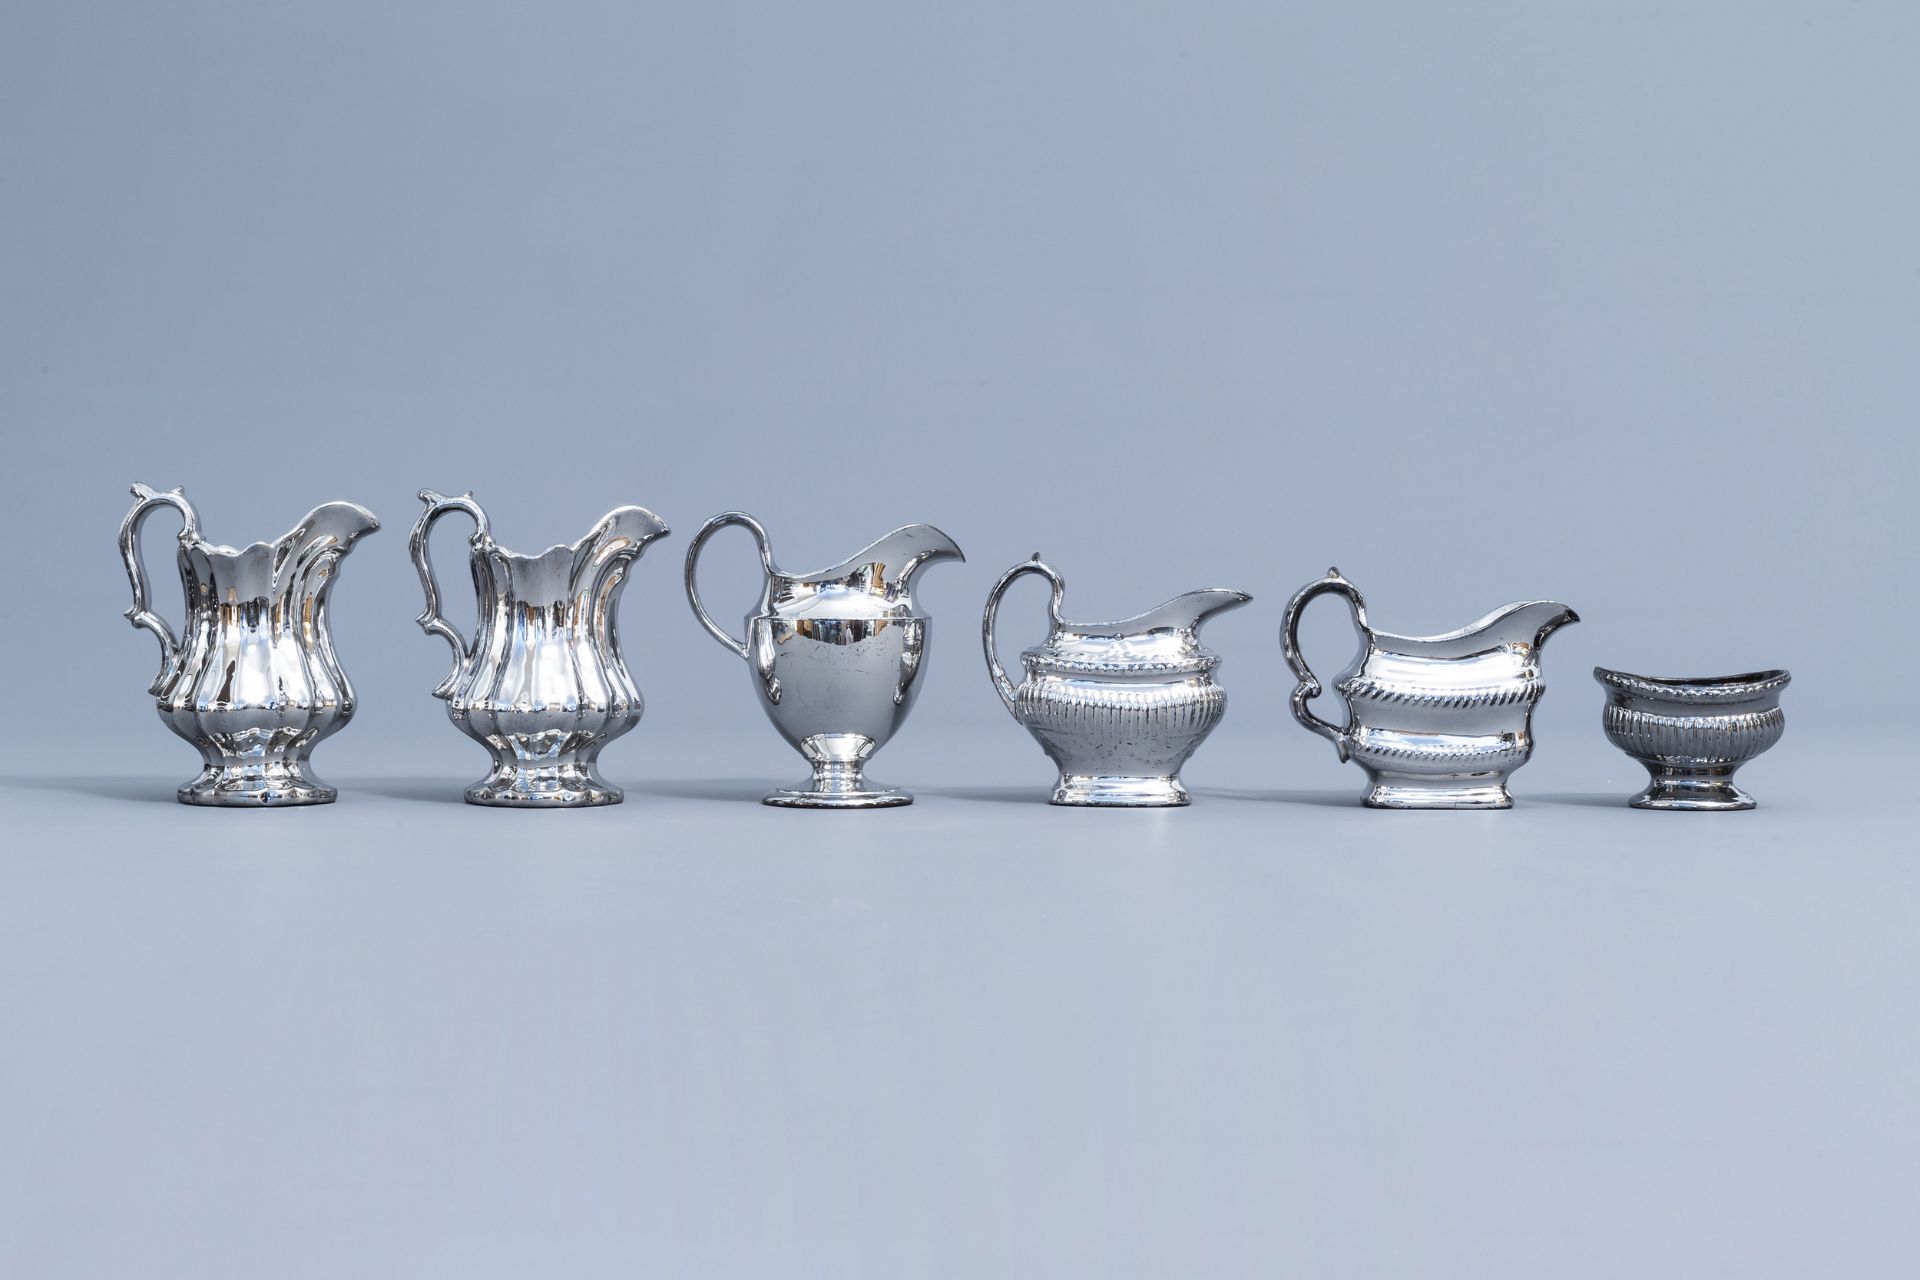 A varied collection of English silver lustreware items, 19th C. - Image 32 of 54